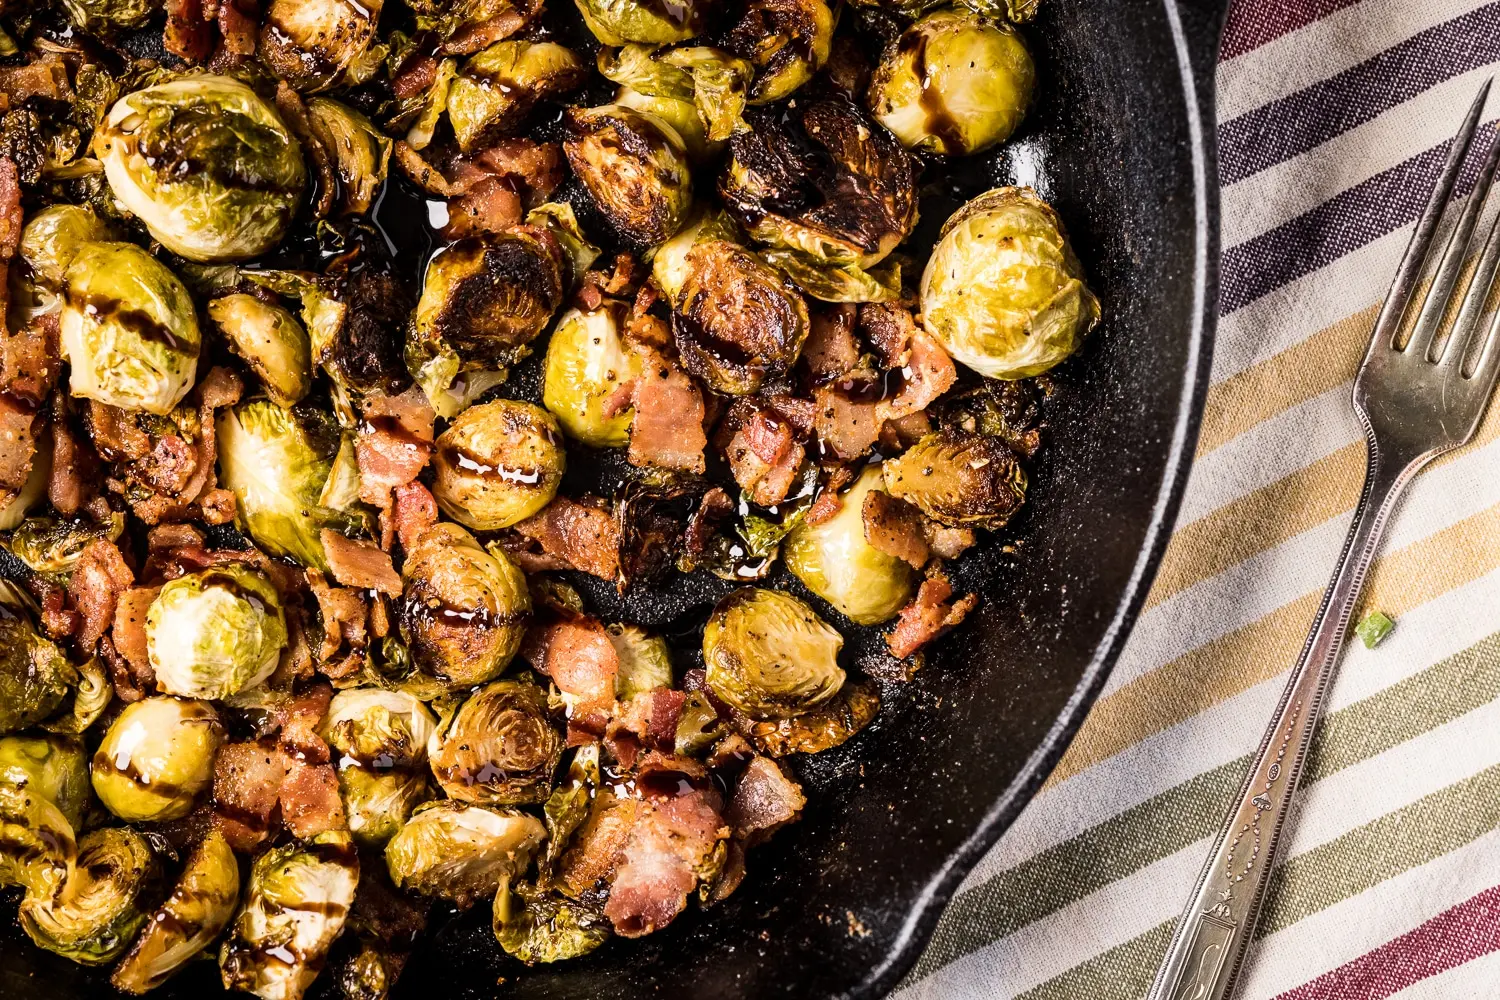 smoked bacon brussel sprouts - Why won't my brussel sprouts get crispy